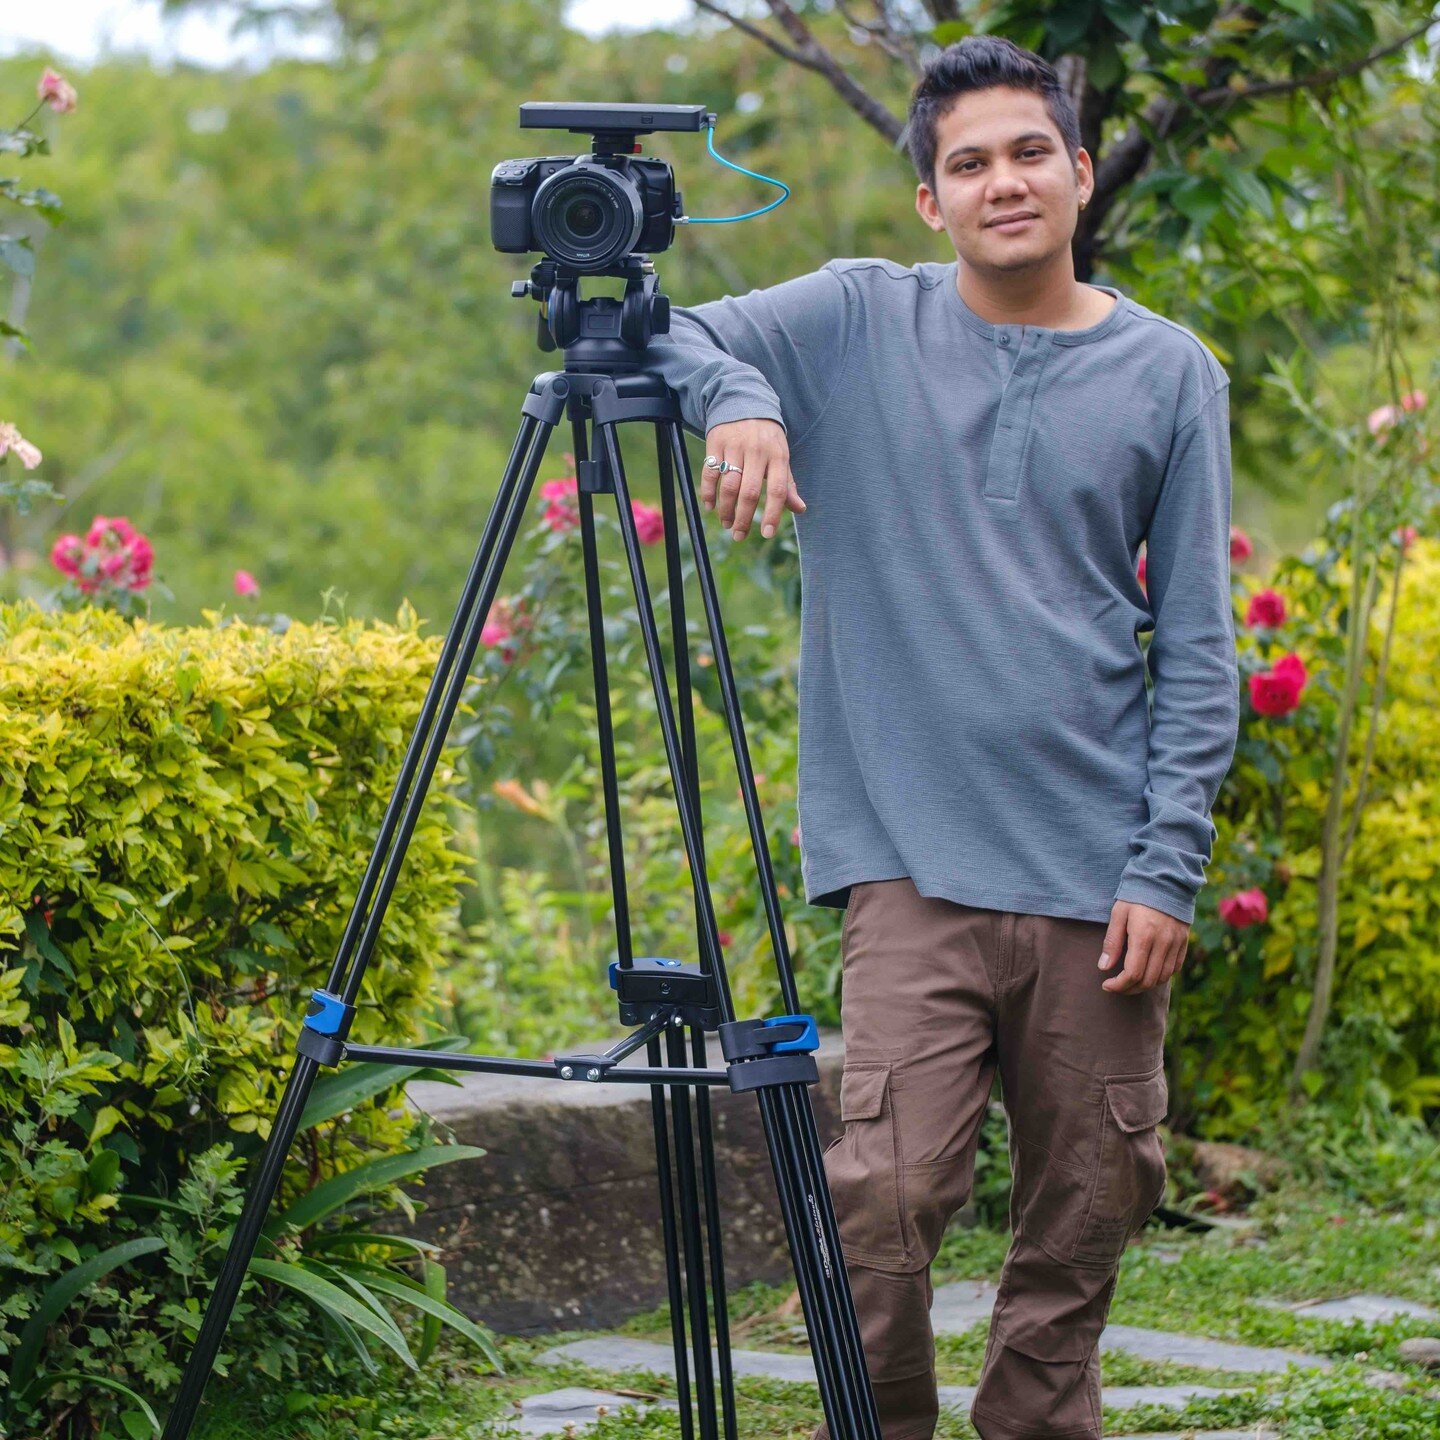 @keyurbajrange is a young cinematographer and part of the Budhan Team. Apart from training the participants in the operation of the camera and the craft of cinematography, he is documenting the project and assisting the edit team to make a film on th